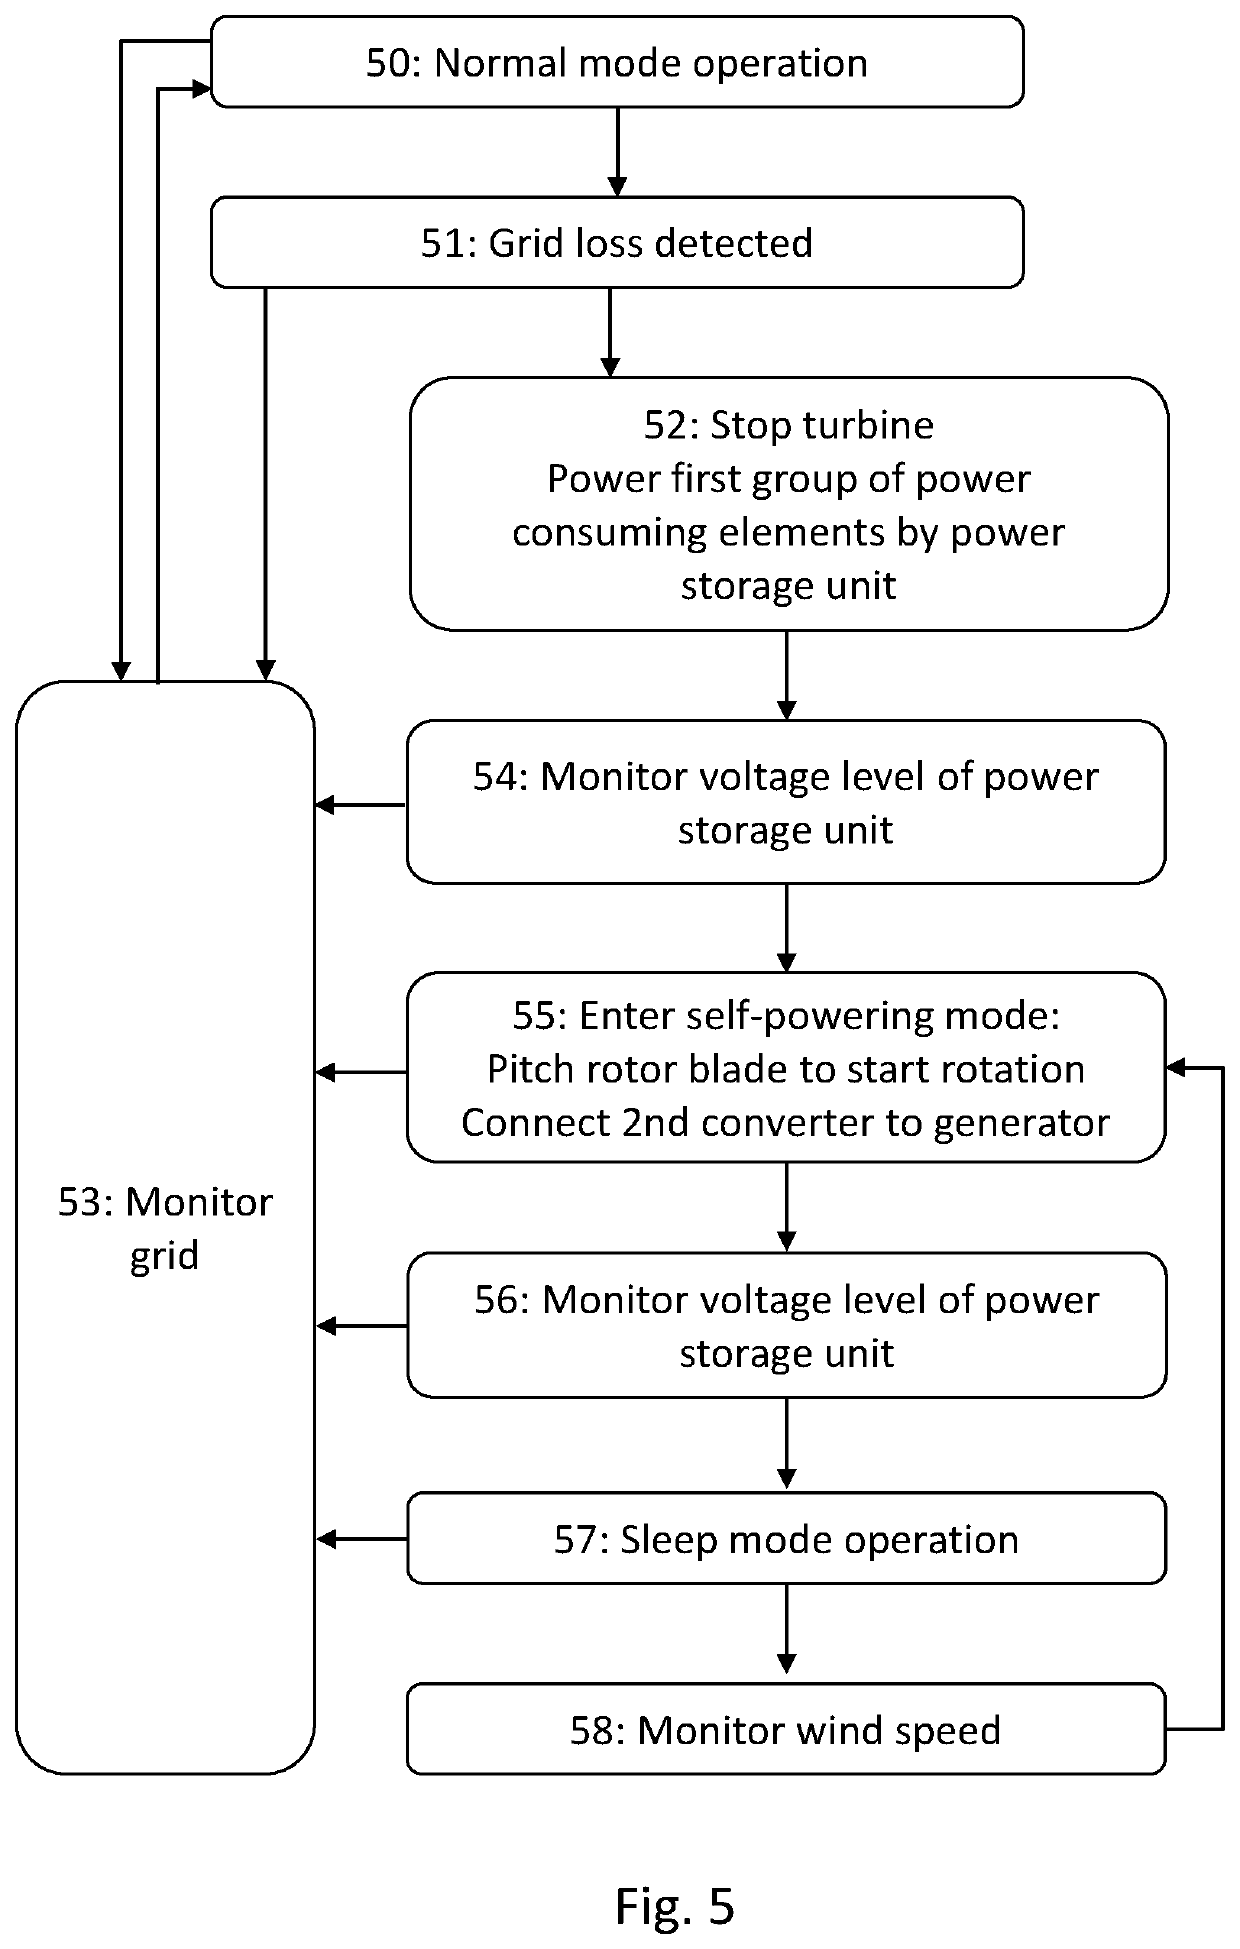 Operation of a wind turbine during grid loss using a power storage unit